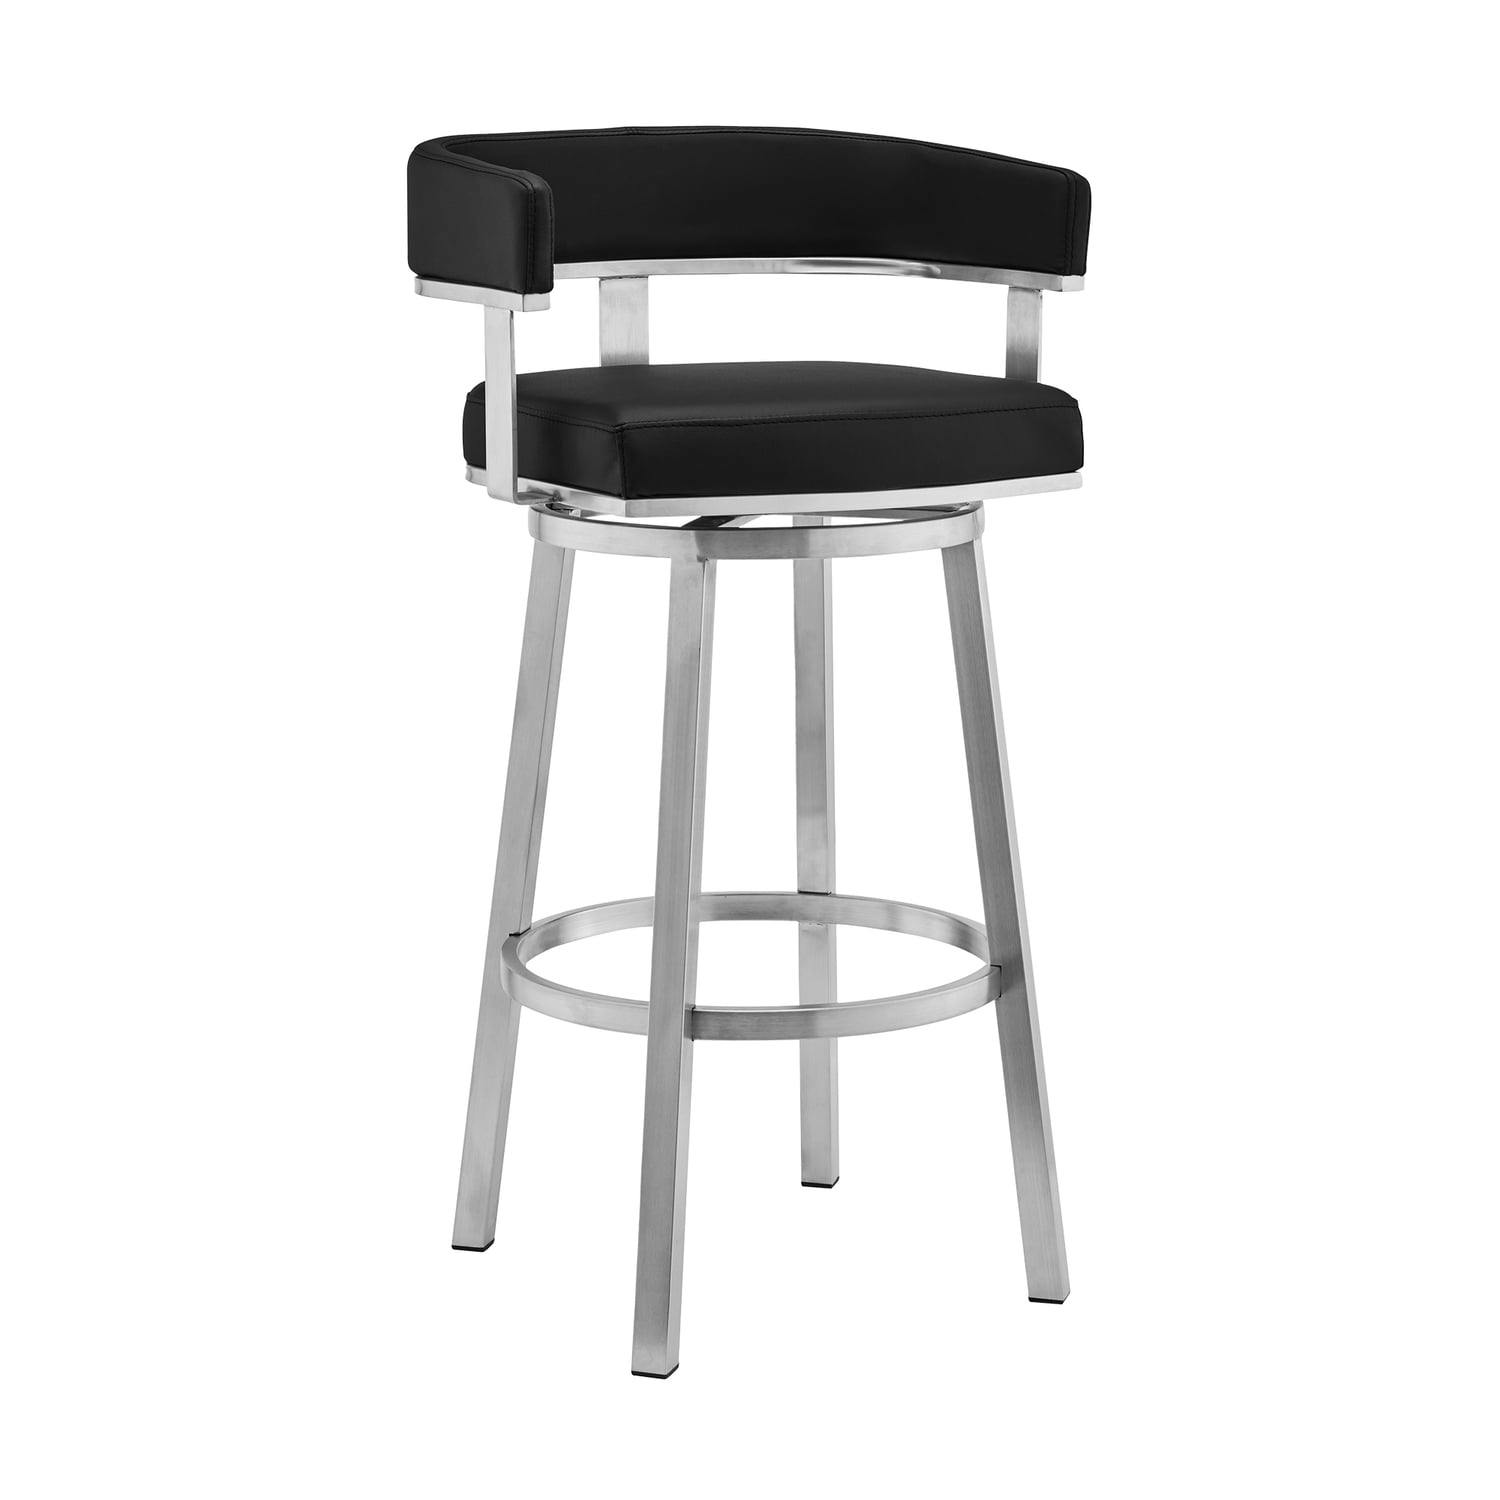 Contemporary 26" Black Faux Leather Swivel Counter Stool with Stainless Steel Base